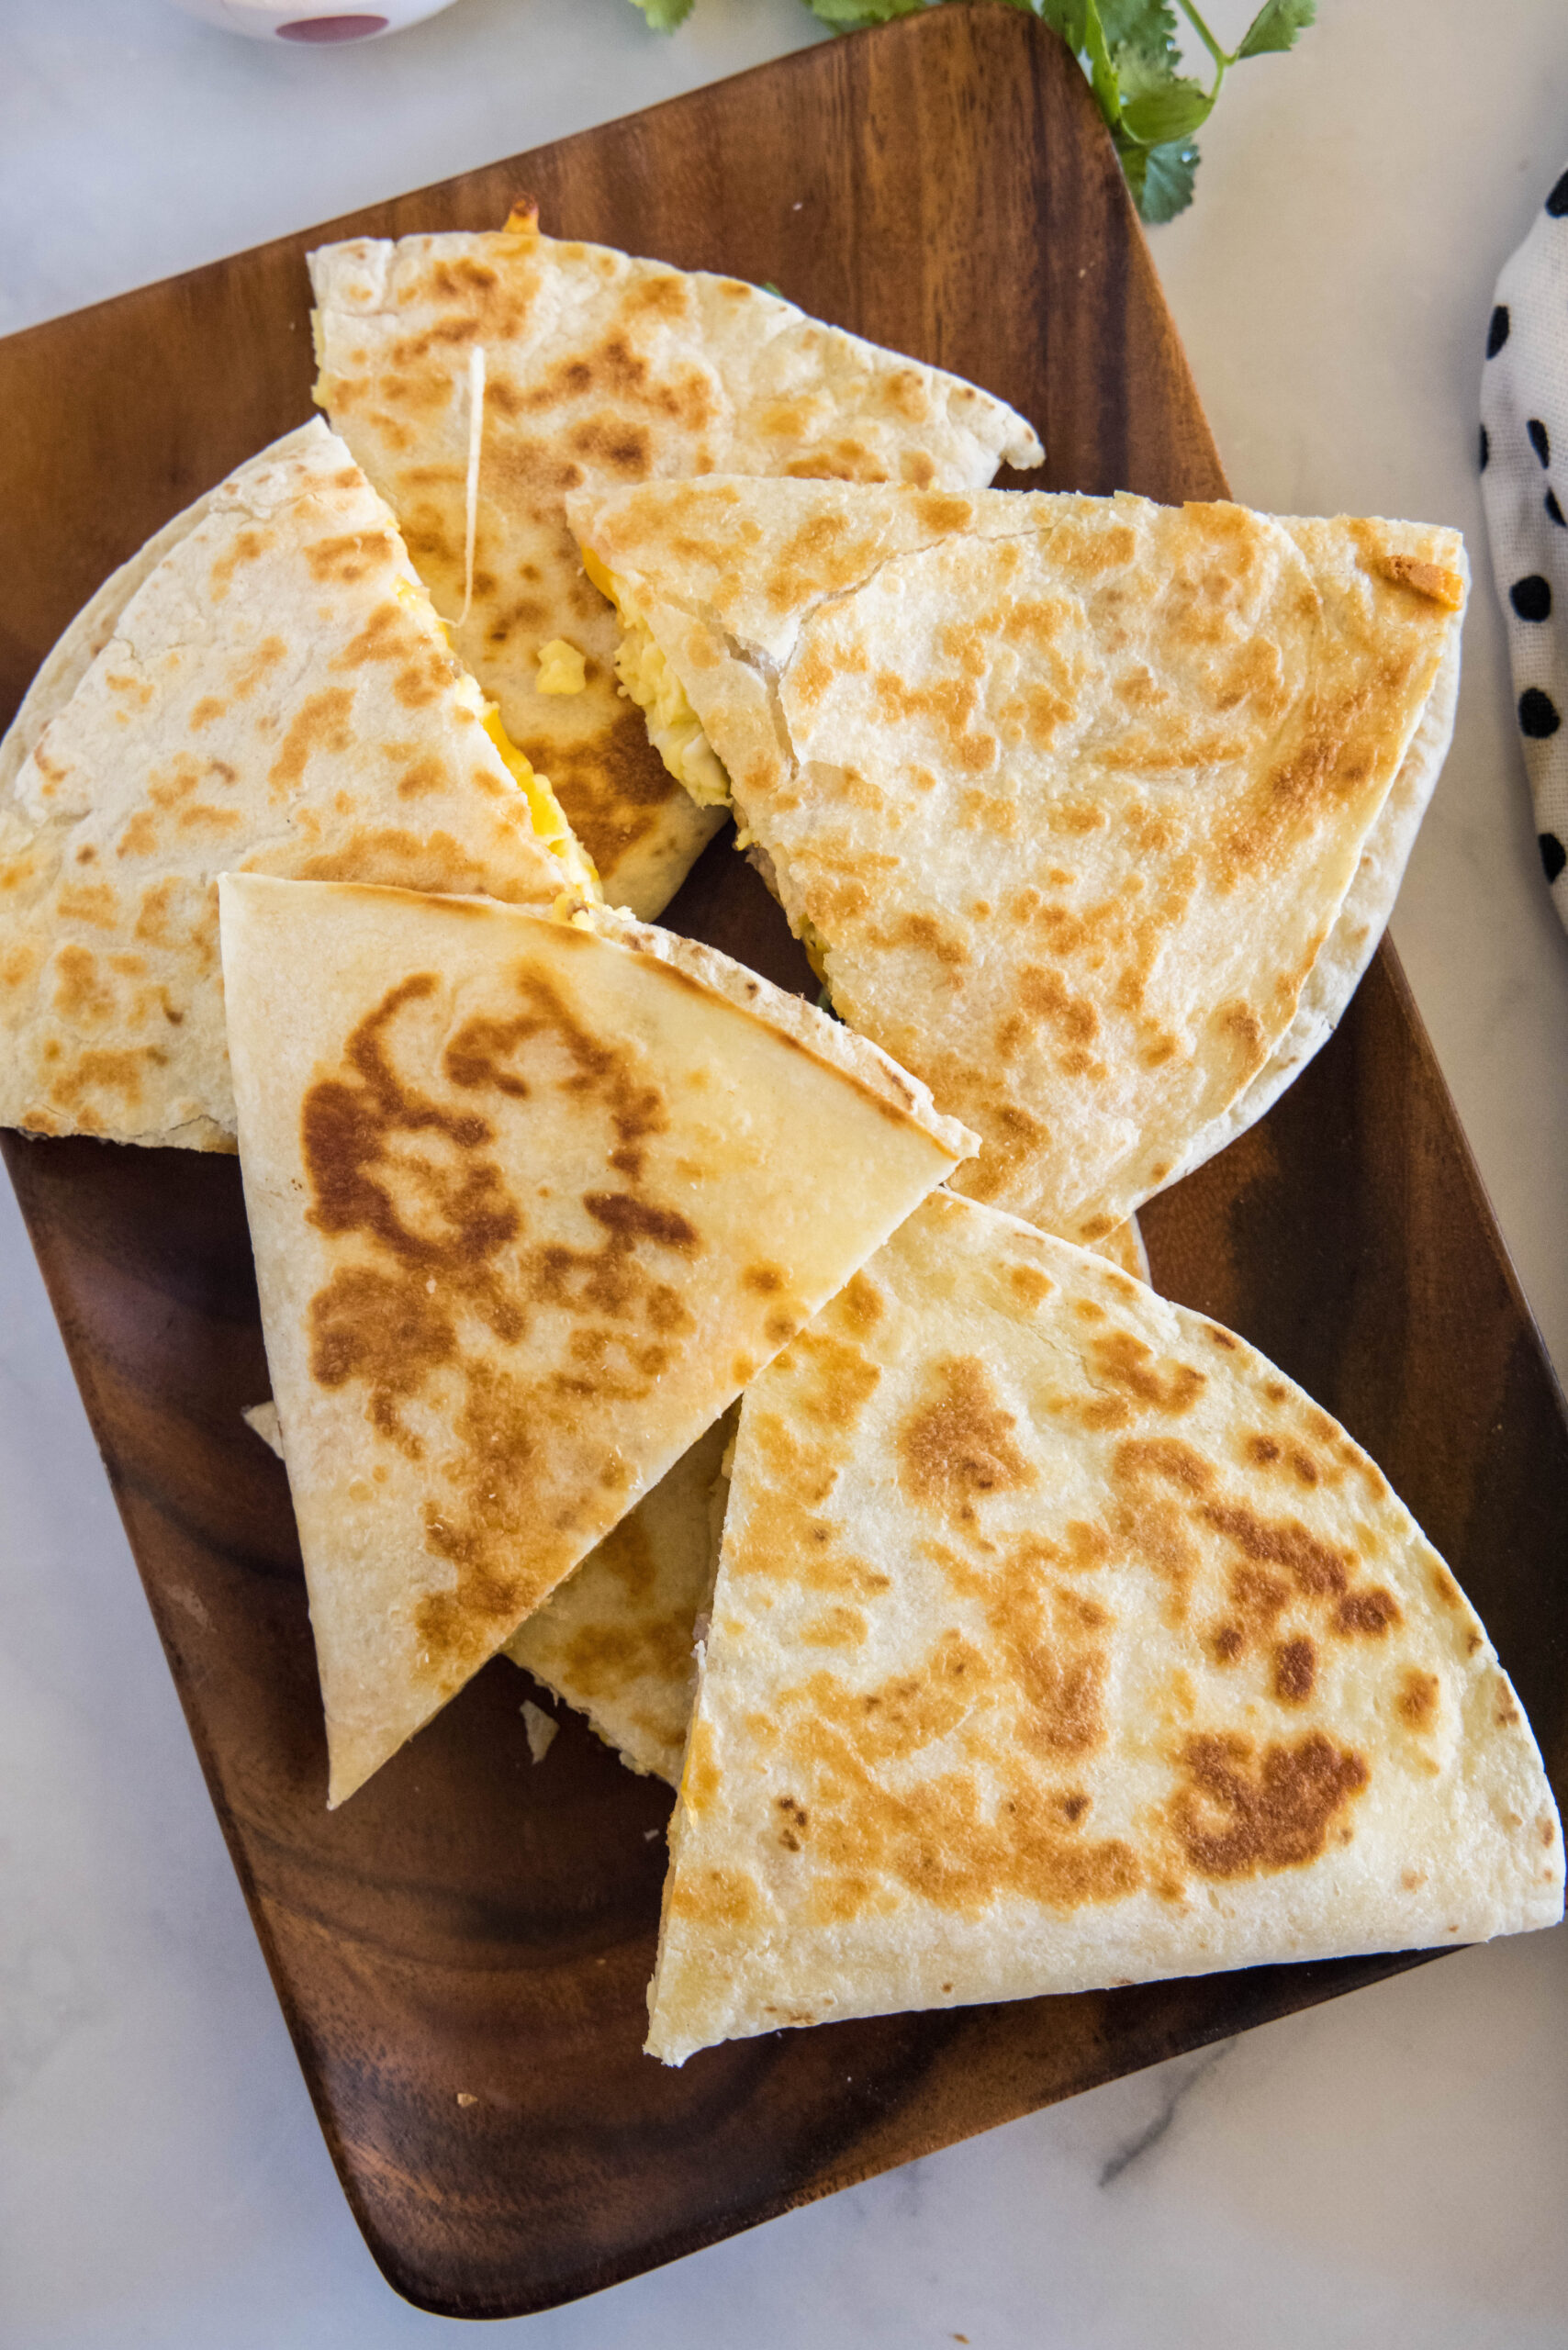 Overhead view of breakfast quesadillas stacked on a wooden serving platter.